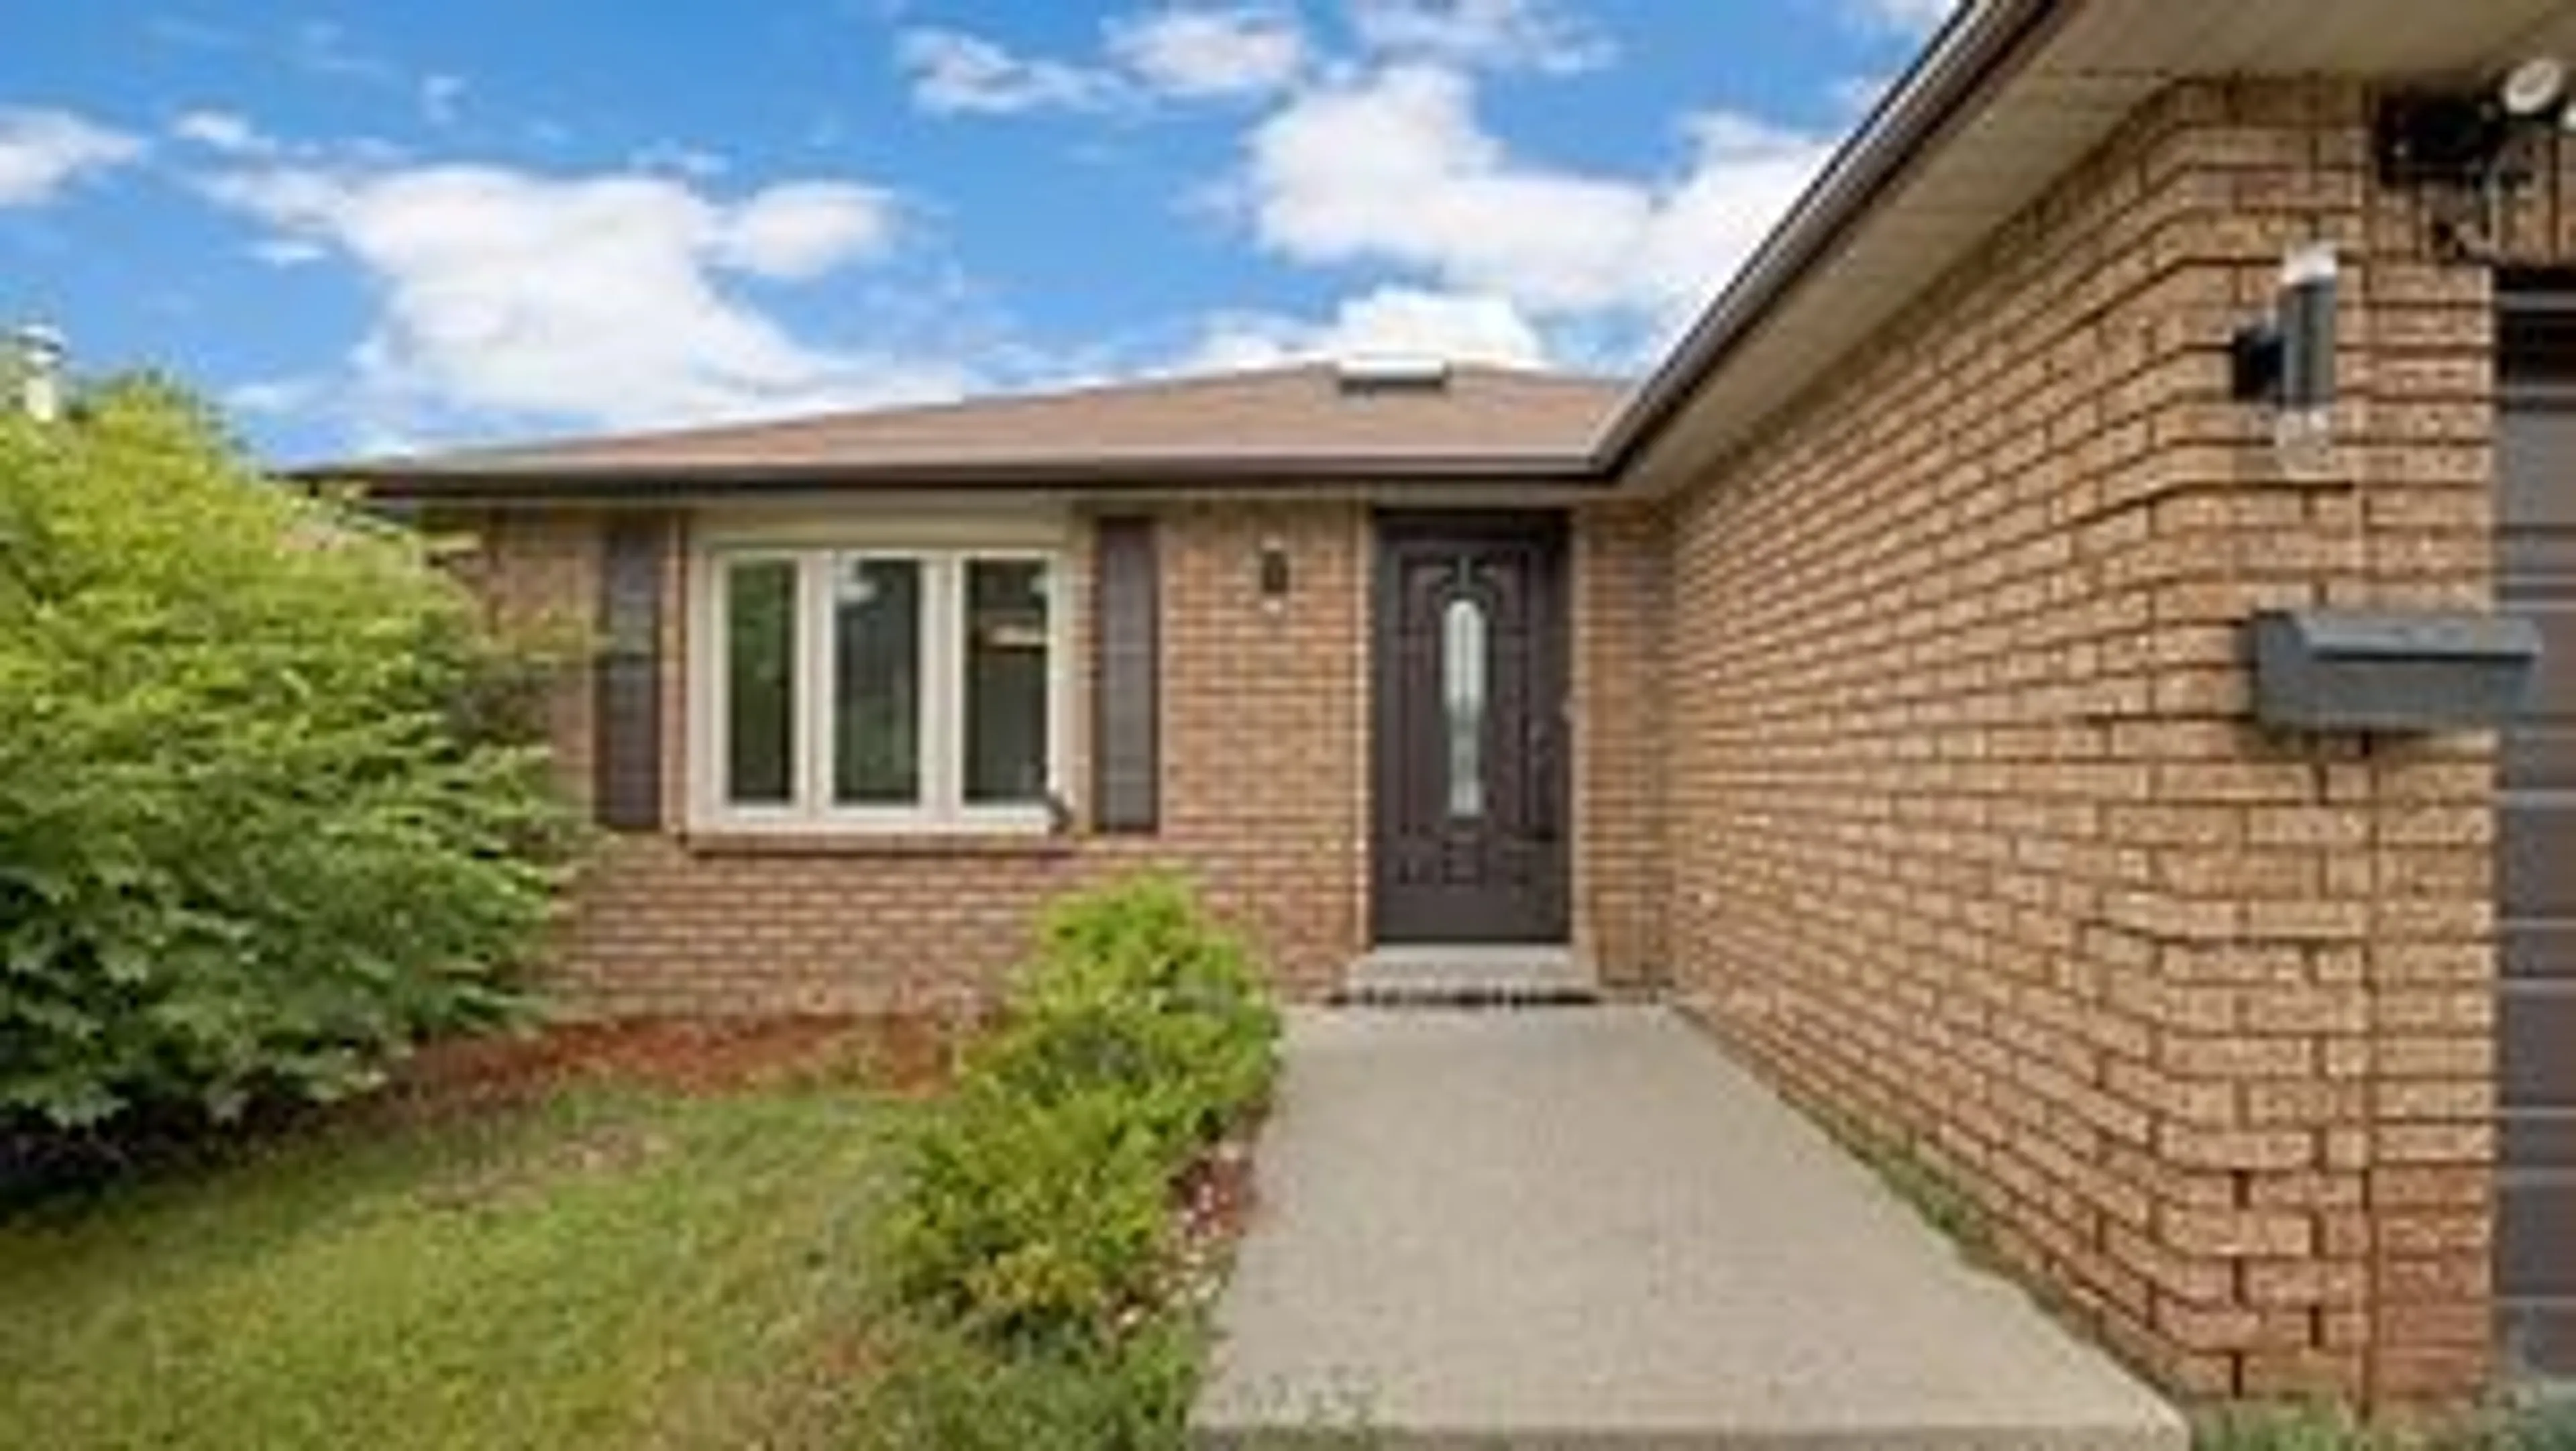 Home with brick exterior material for 280 Livingstone St, Barrie Ontario L4N 7A9